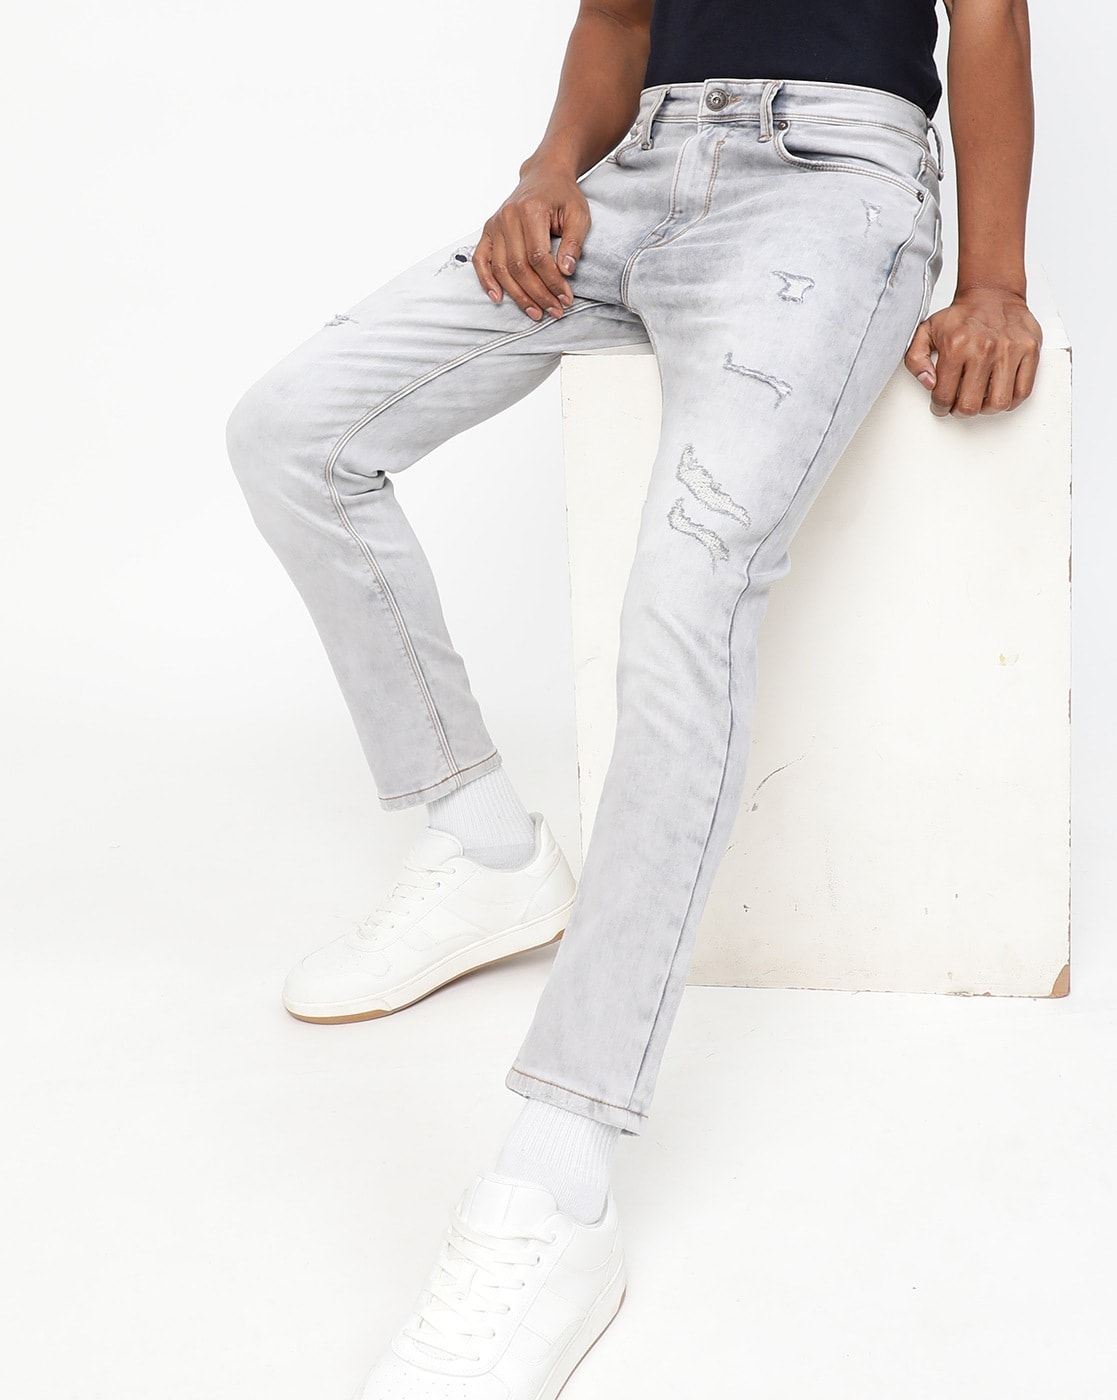 Discover 204+ grey white jeans best